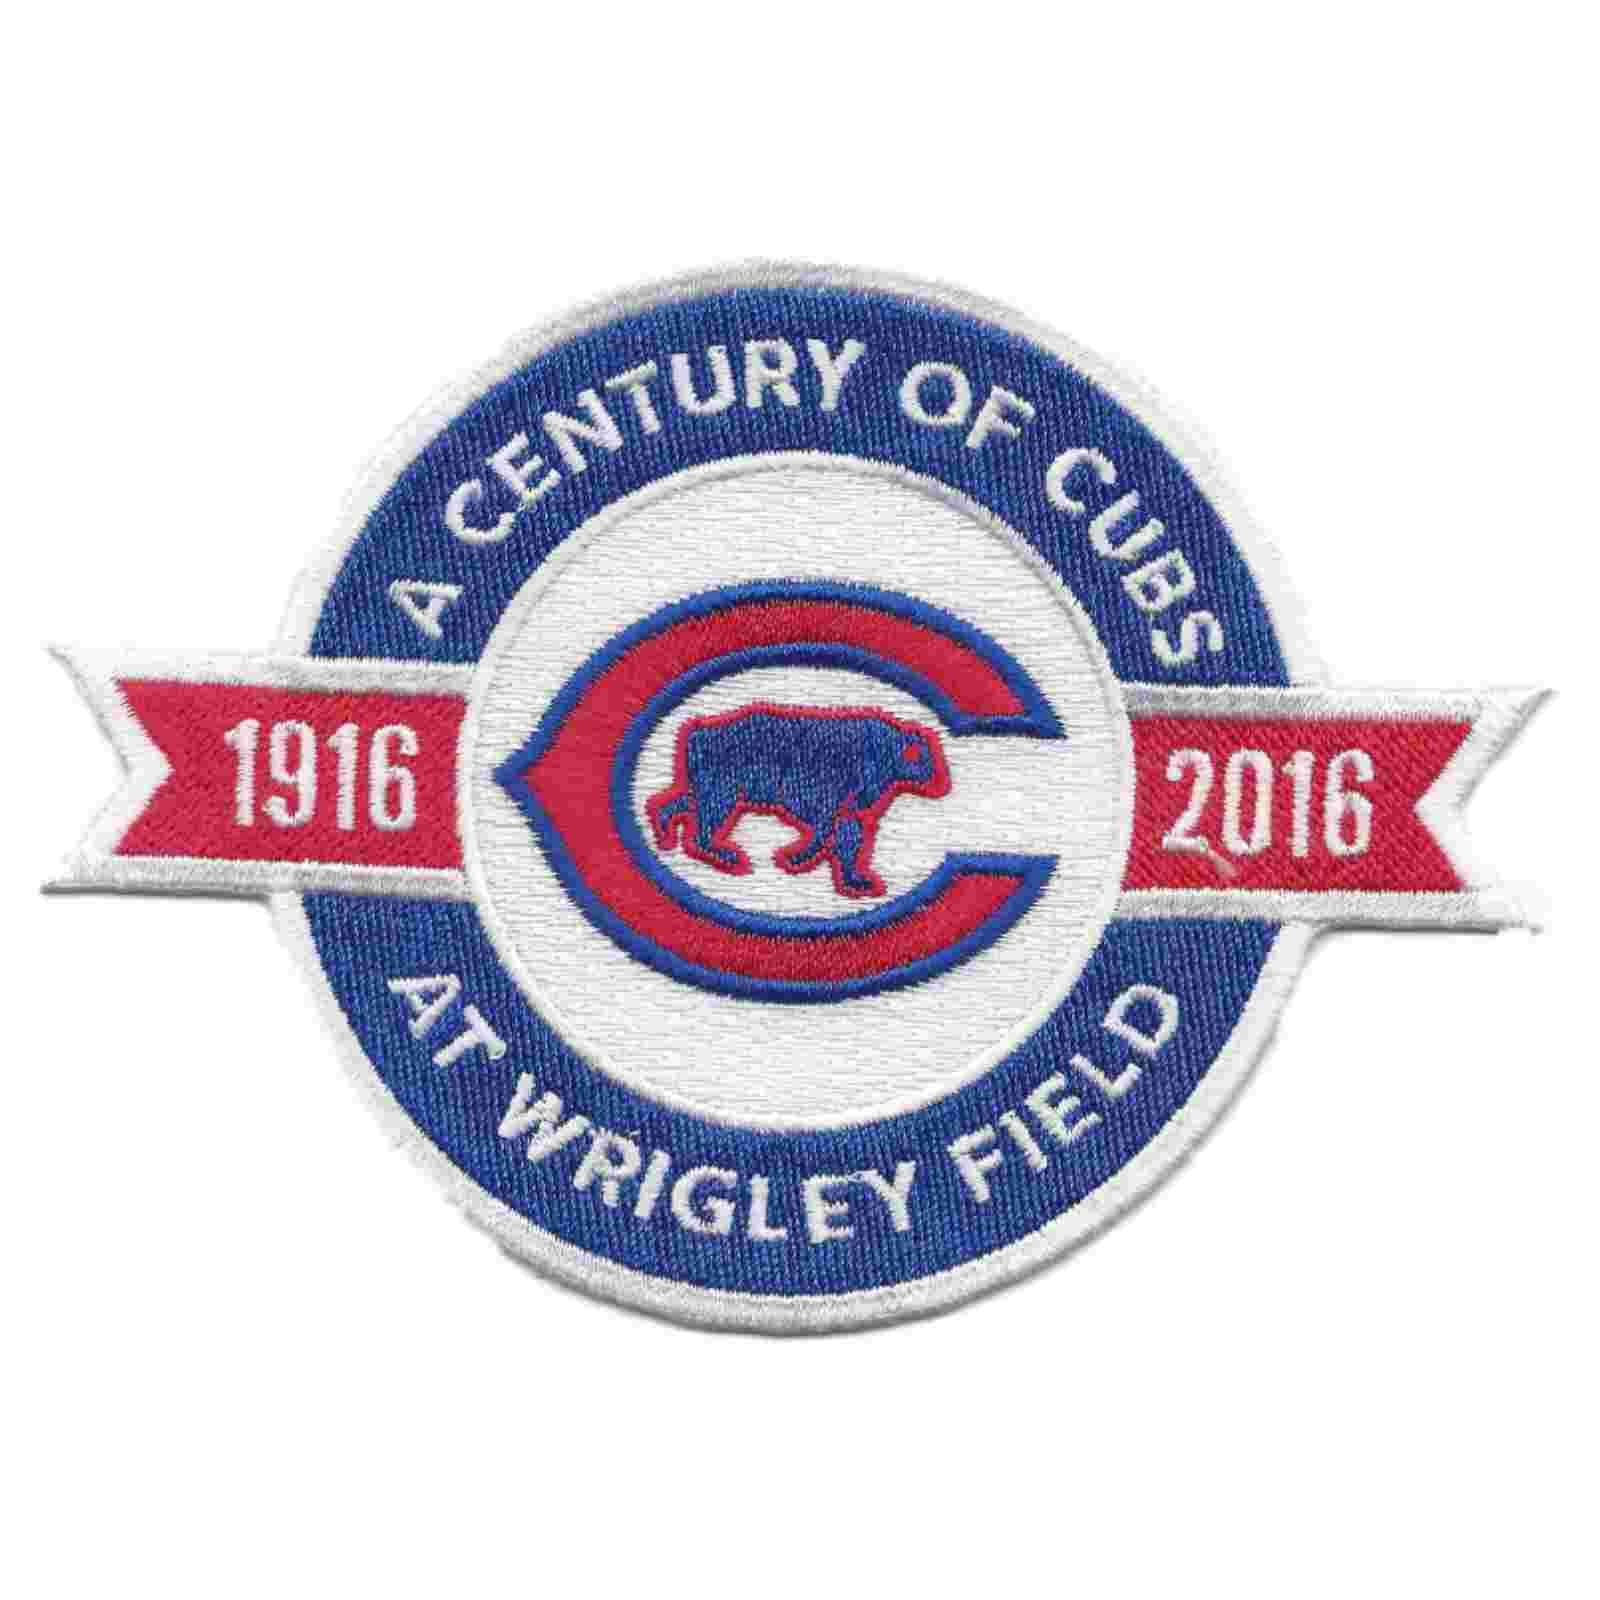 Chicago Cubs A Century of Cubs at Wrigley Field 1916-2016 Jersey